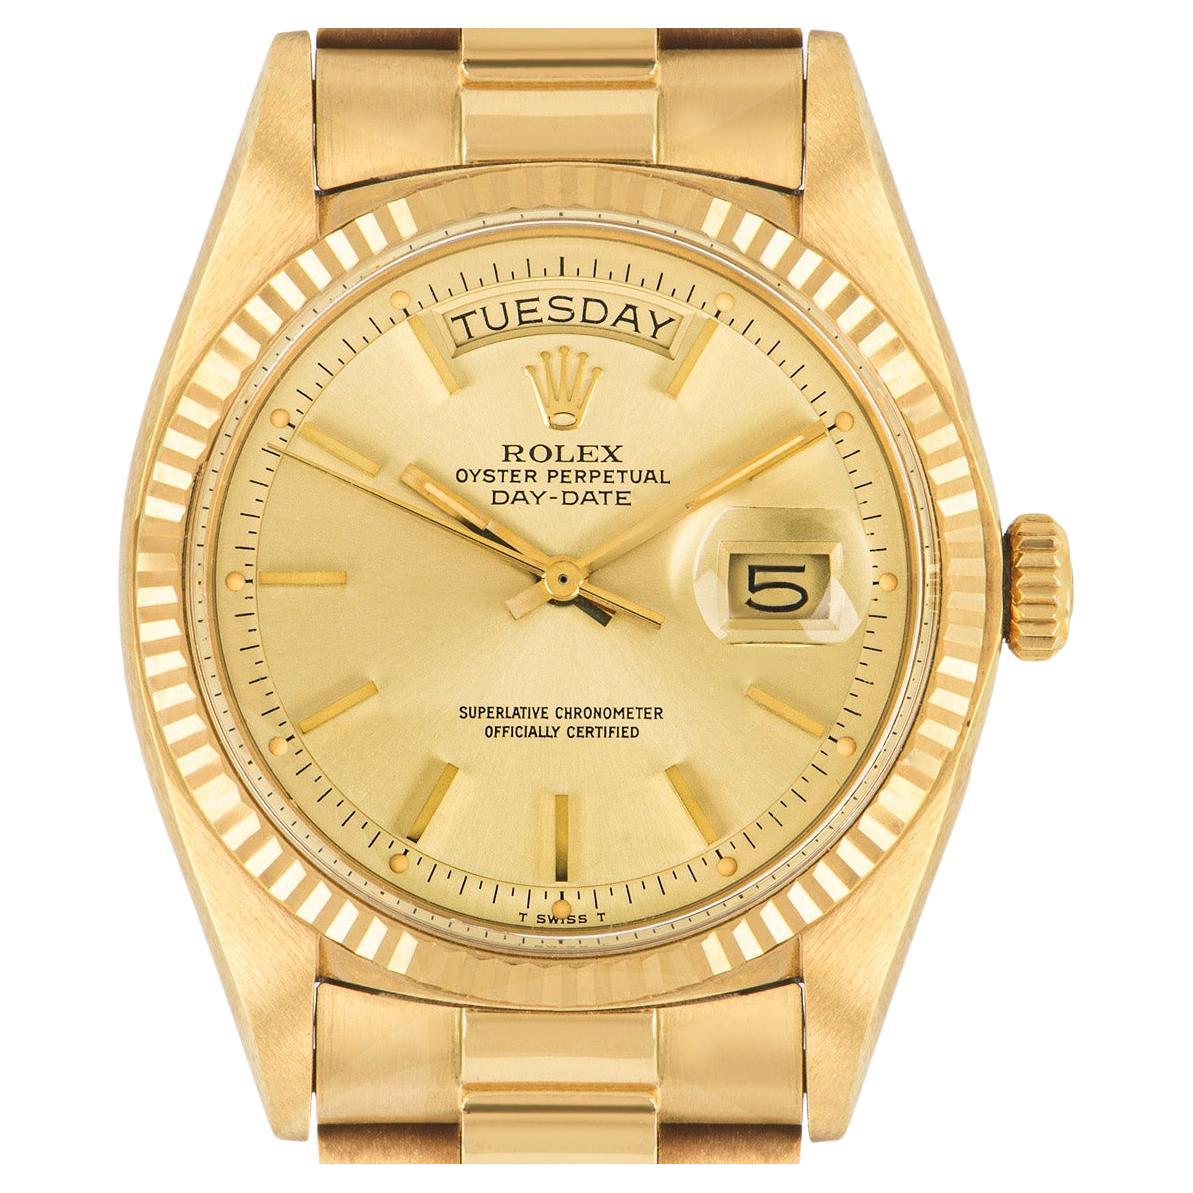 This unworn NOS Day-Date in 18k yellow gold by Rolex, features a champagne dial with applied hour markers and a fixed yellow gold fluted bezel. Fitted with a plastic glass, a self-winding automatic movement and a yellow gold president bracelet